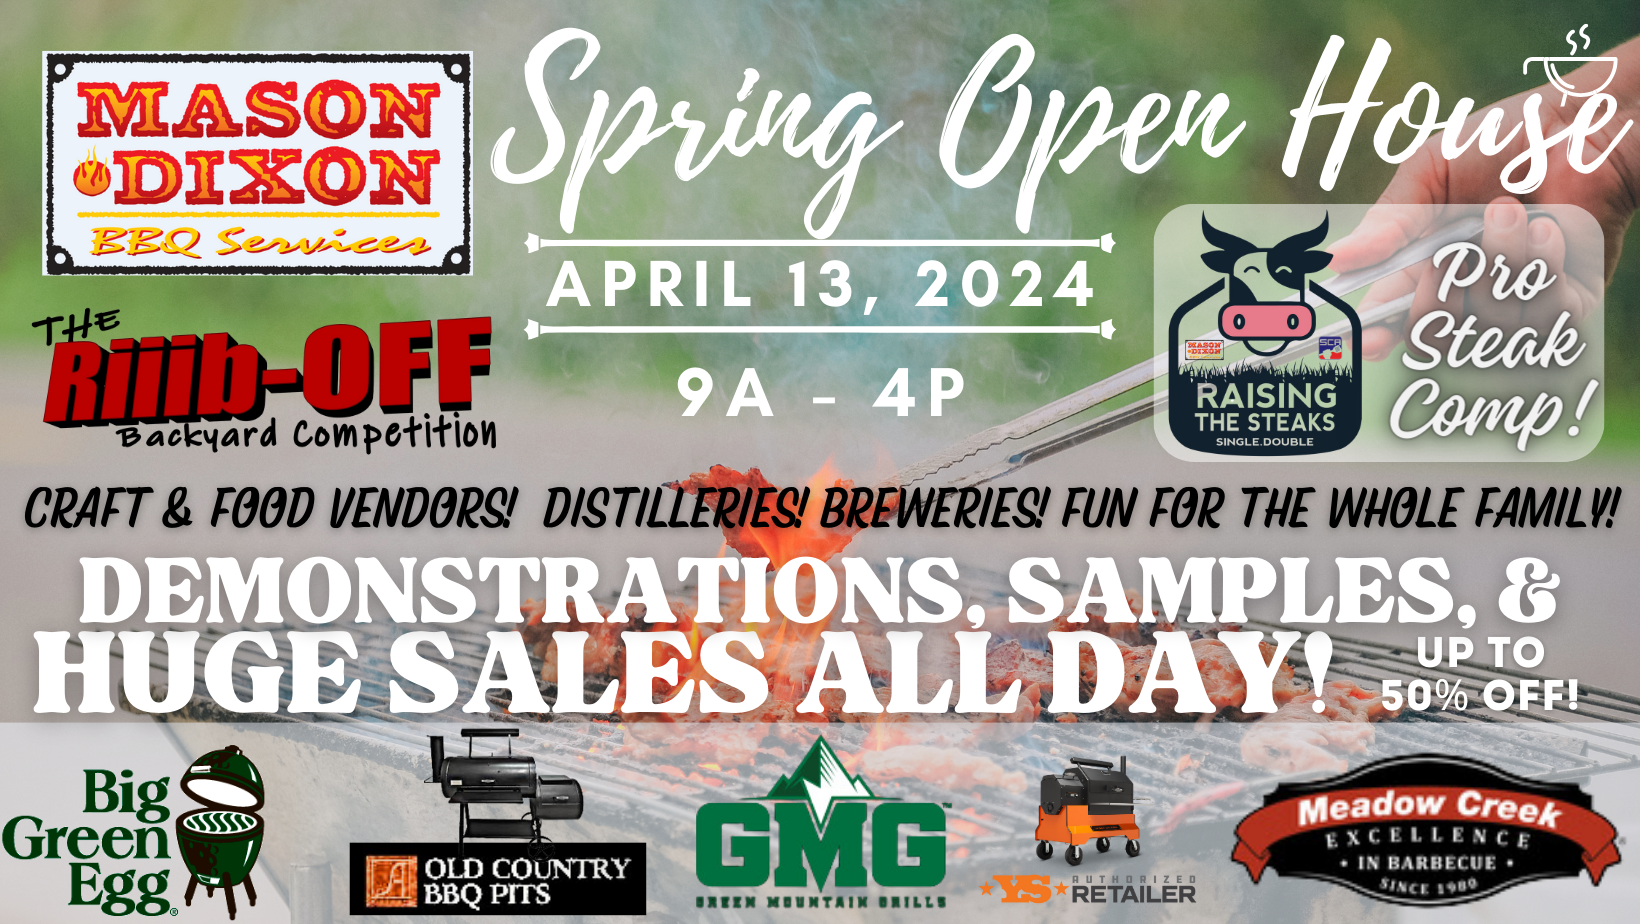 Mason Dixon BBQ Services Spring Open House, April 12, 2024, 9 am to 4 pm. The Riboff backyard competition. Raising the Steaks Pro Steak Comp. Craft and food vendors. Distilleries. Breweries. Fun for the whole family. Demonstrations, samples, and huge sales all day. Up to 50% off. 